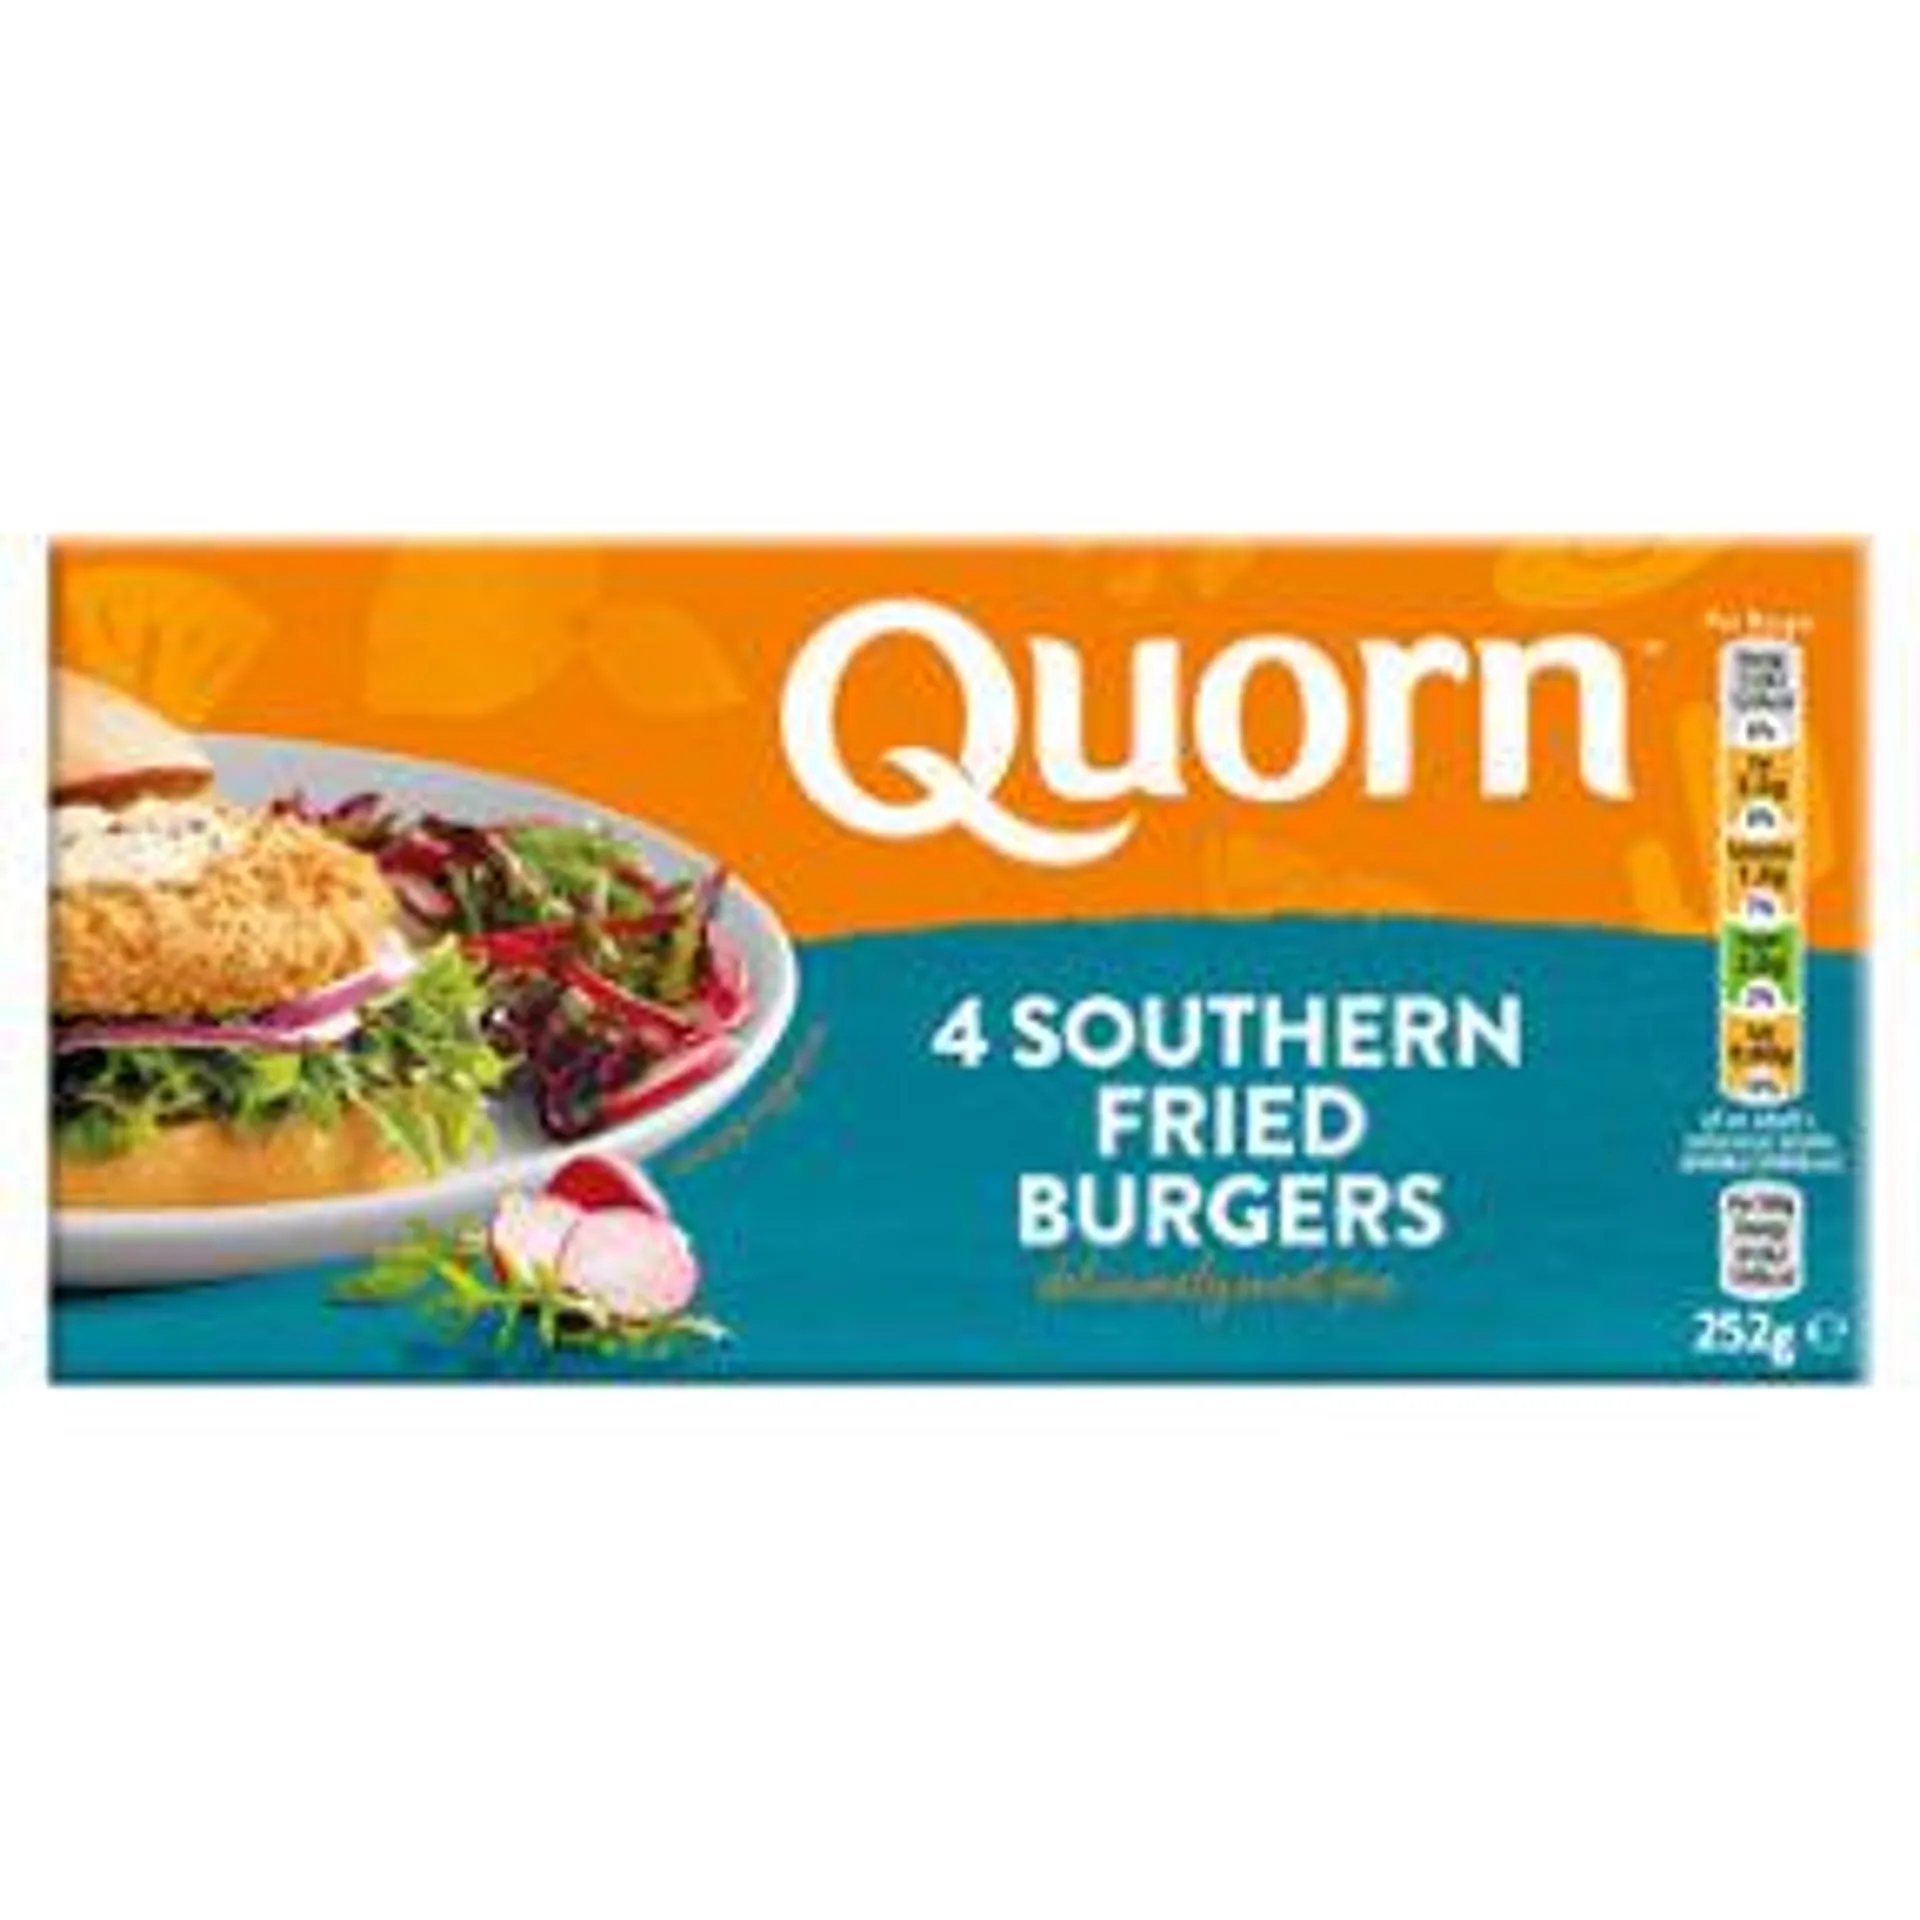 Quorn Vegetarian 4 Southern Fried Burgers